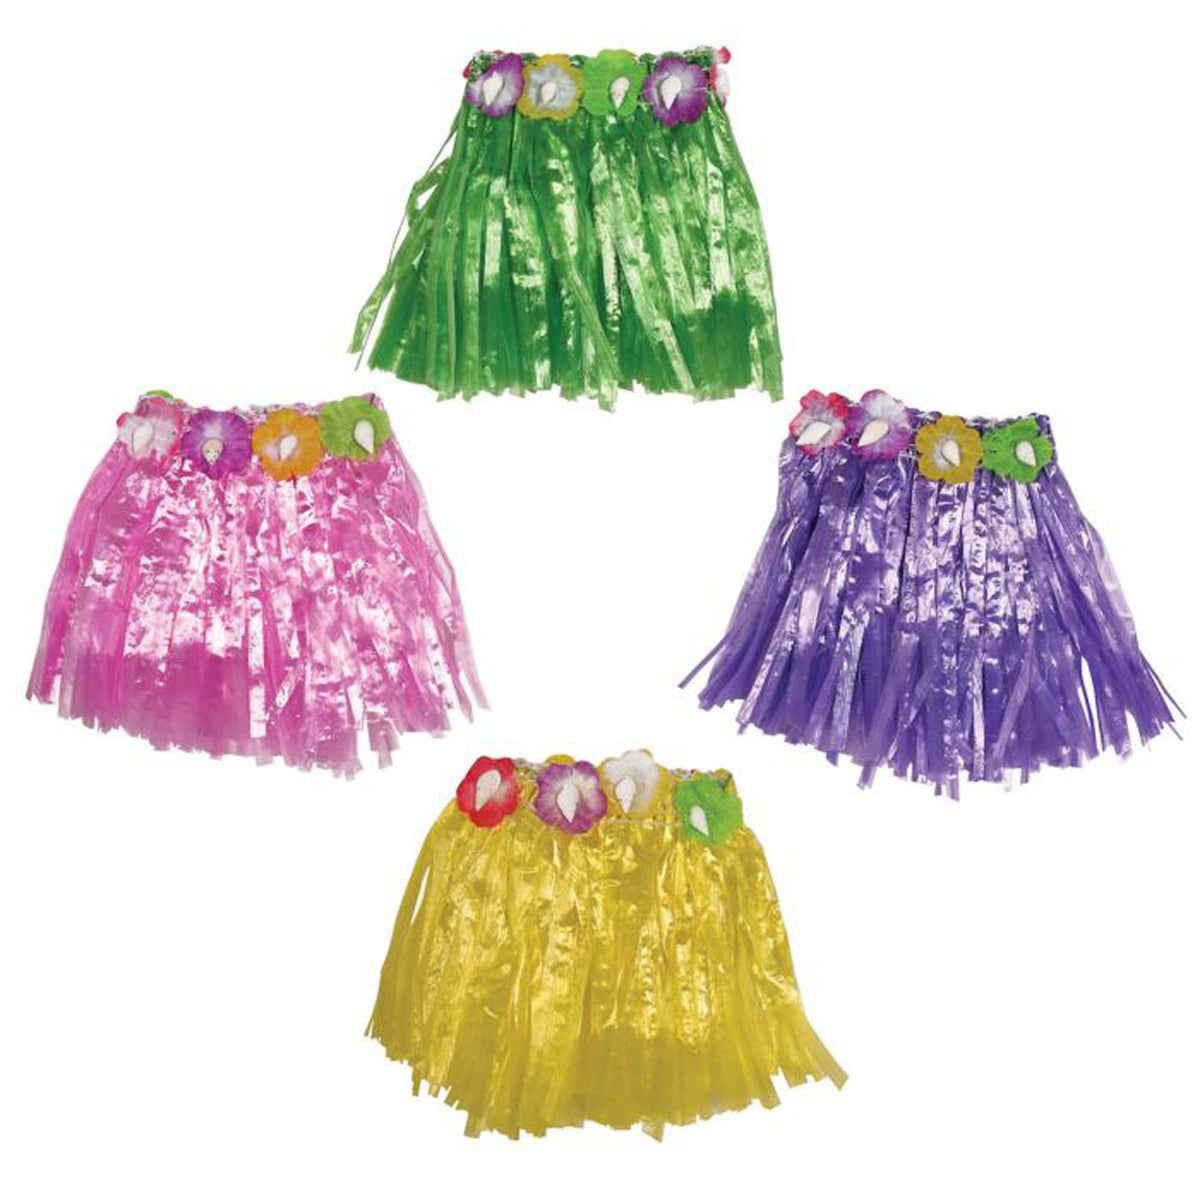 BEISTLE COMPANY Theme Party Hula Skirt for Drinks, 3.5 Inches, 4 Count